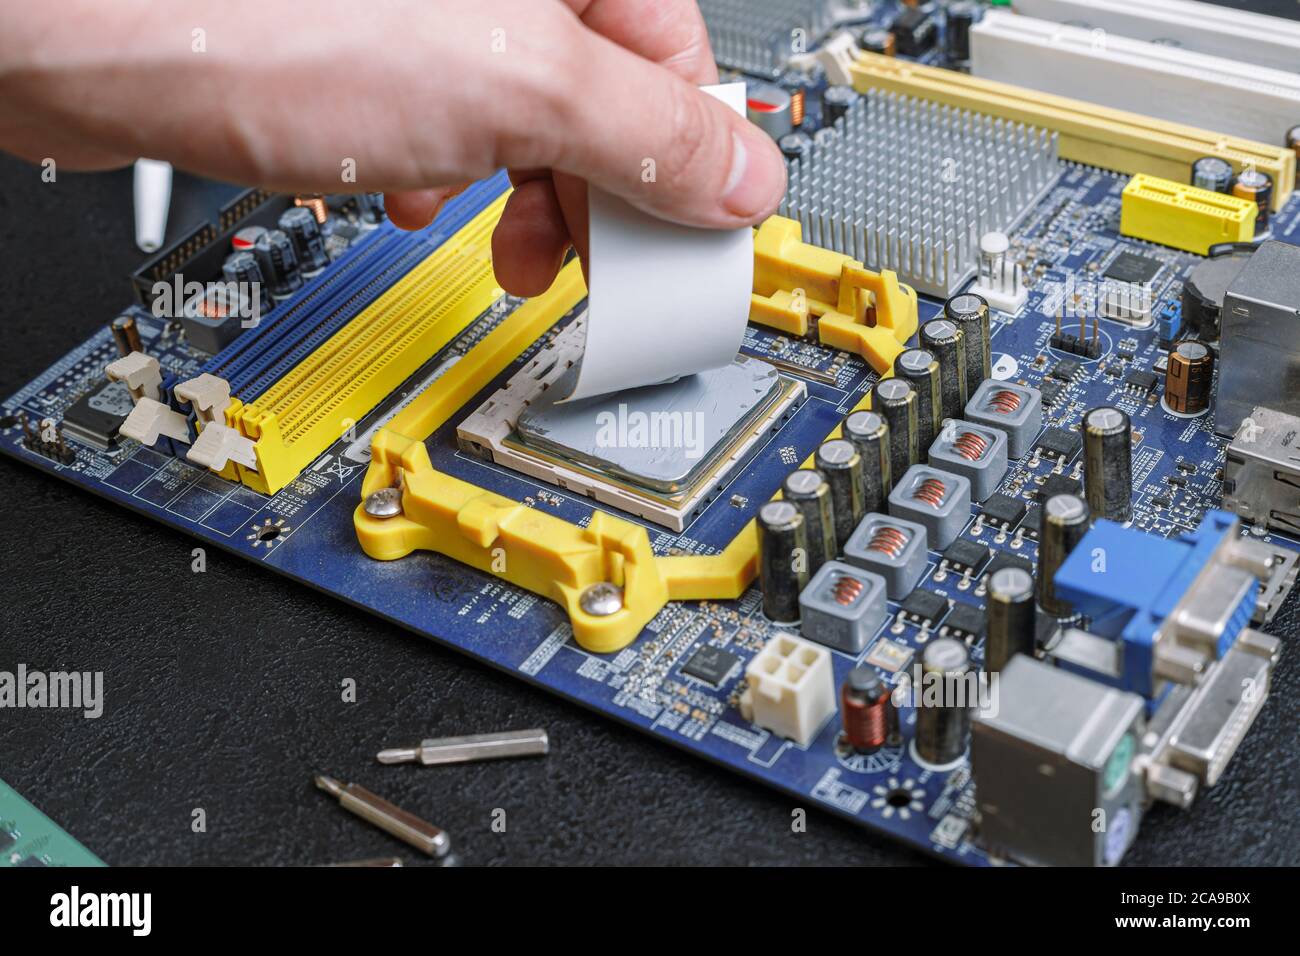 Winneconne, WI - 24 December 2019 : A package of Kryonaut thermal grizzly  thermal paste grease on an isolated background Stock Photo - Alamy